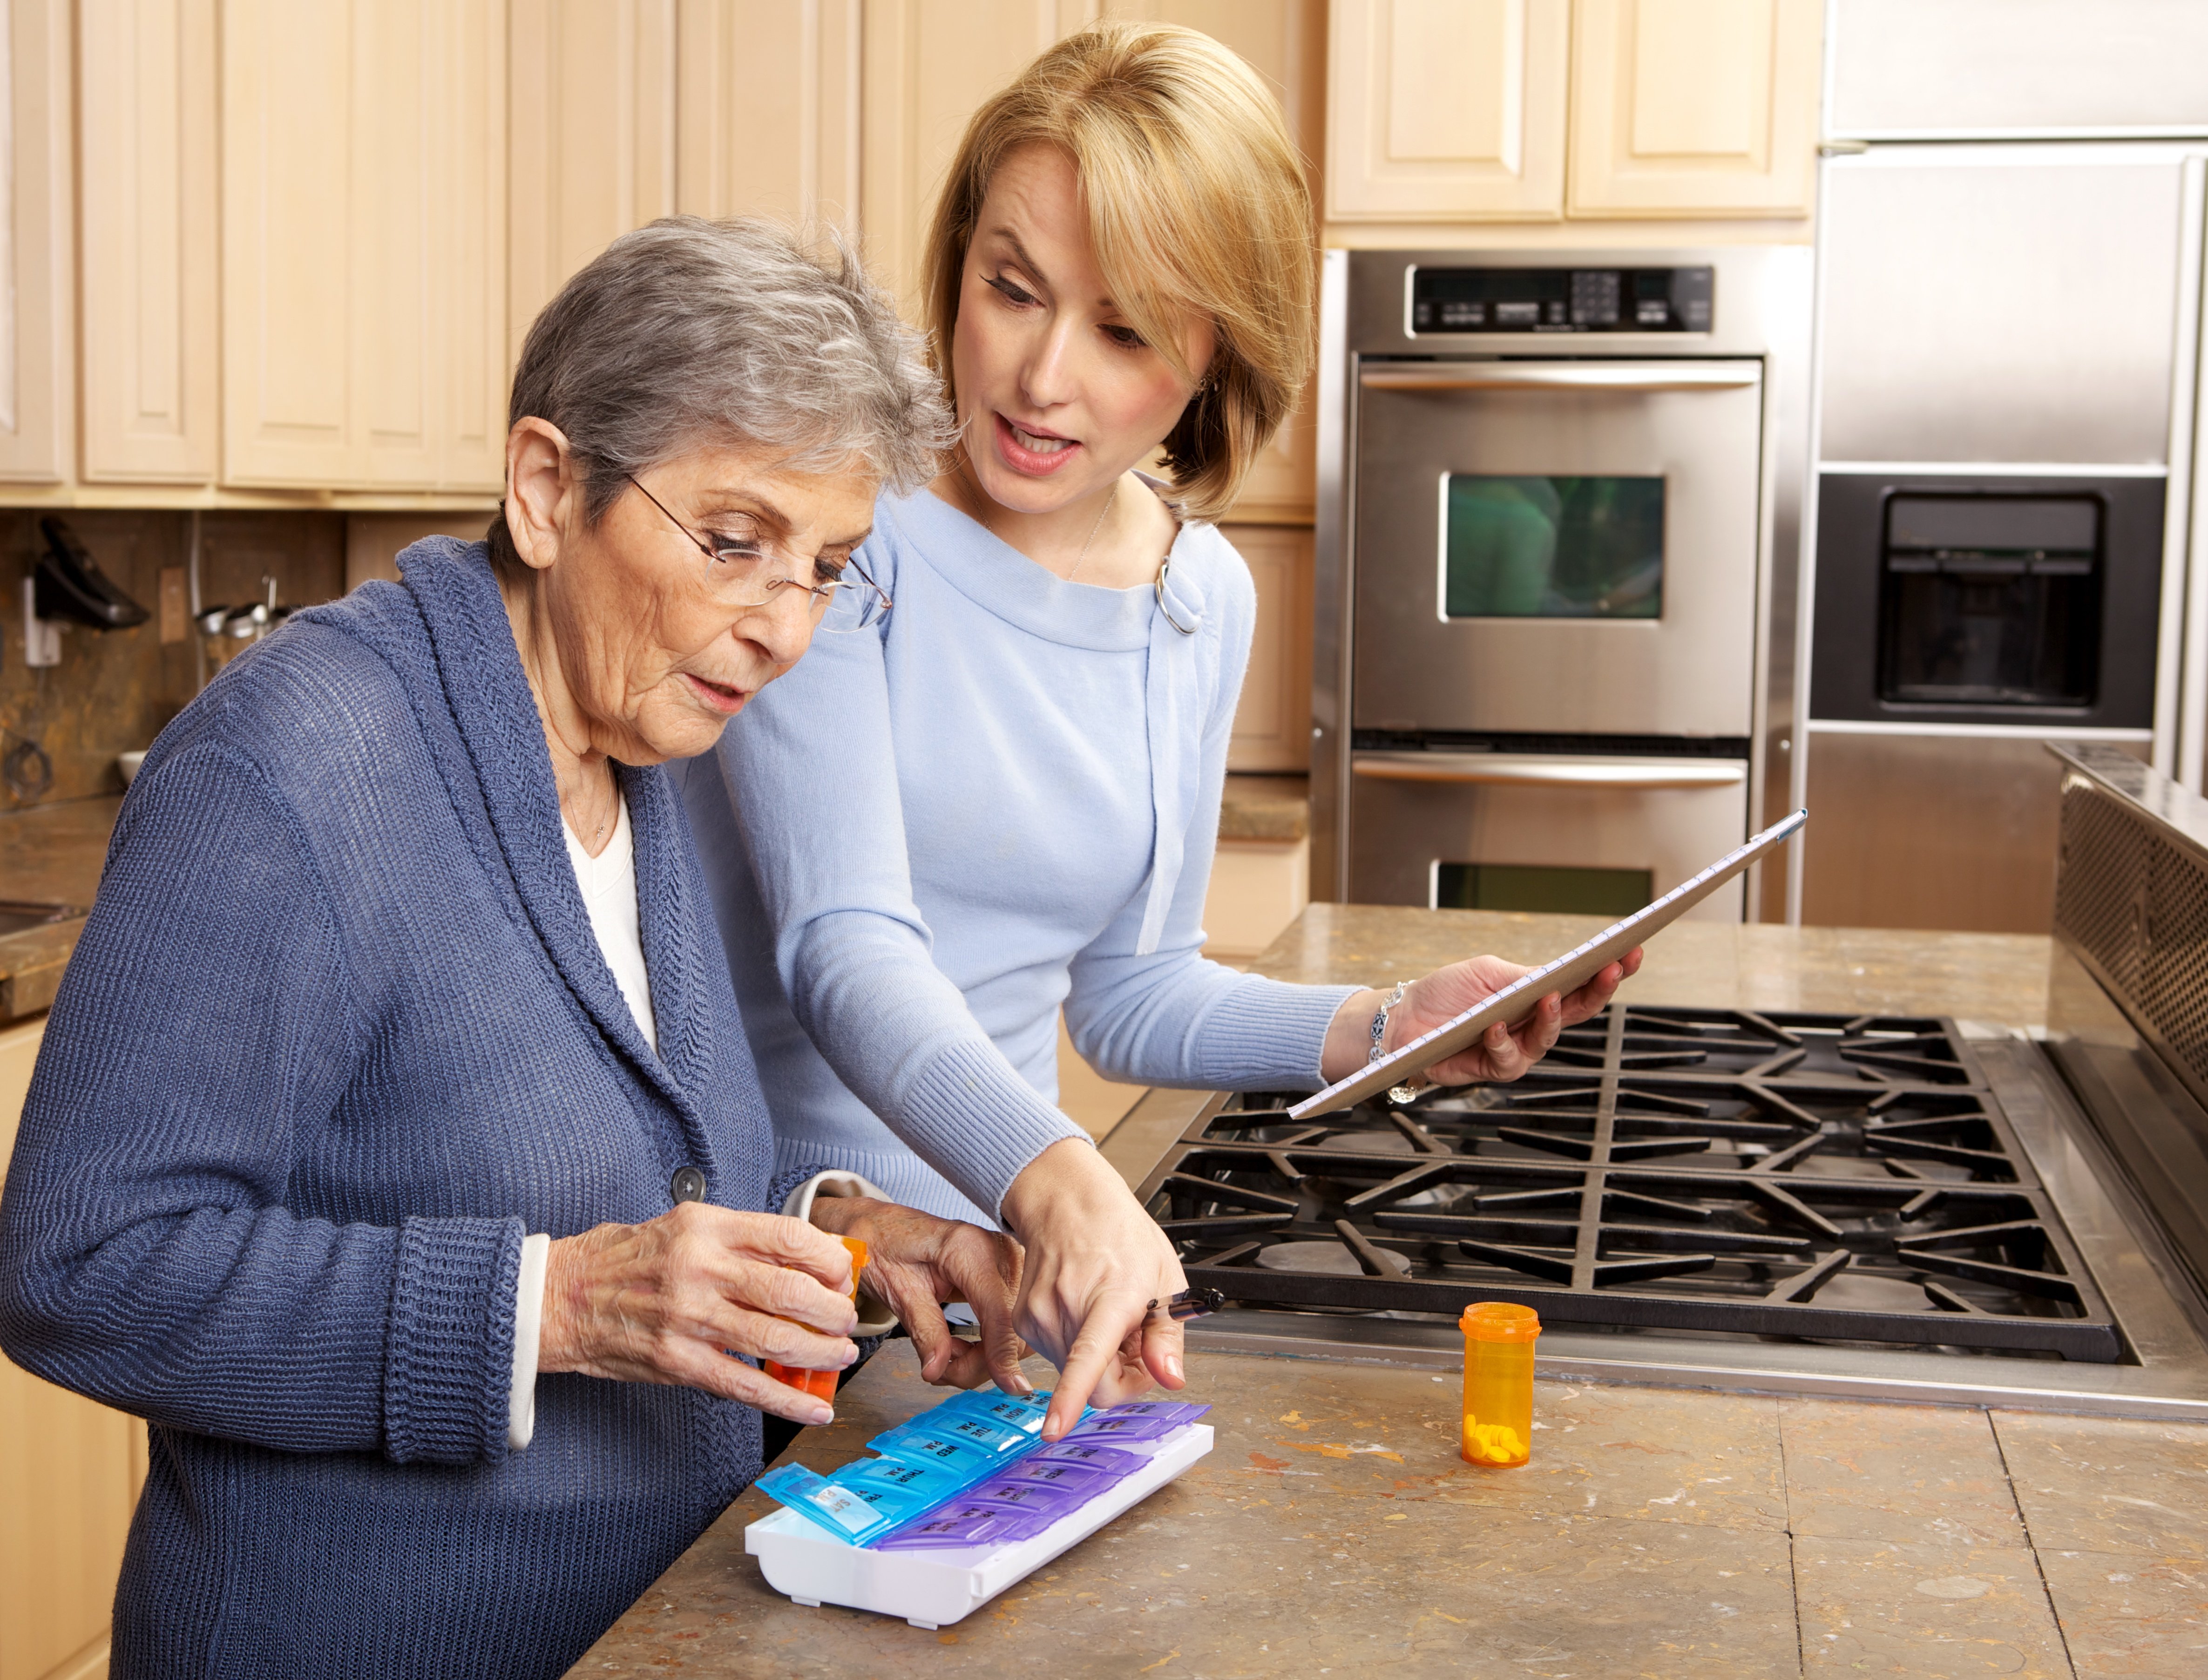 Family caregiver managing medications for a parent with dementia